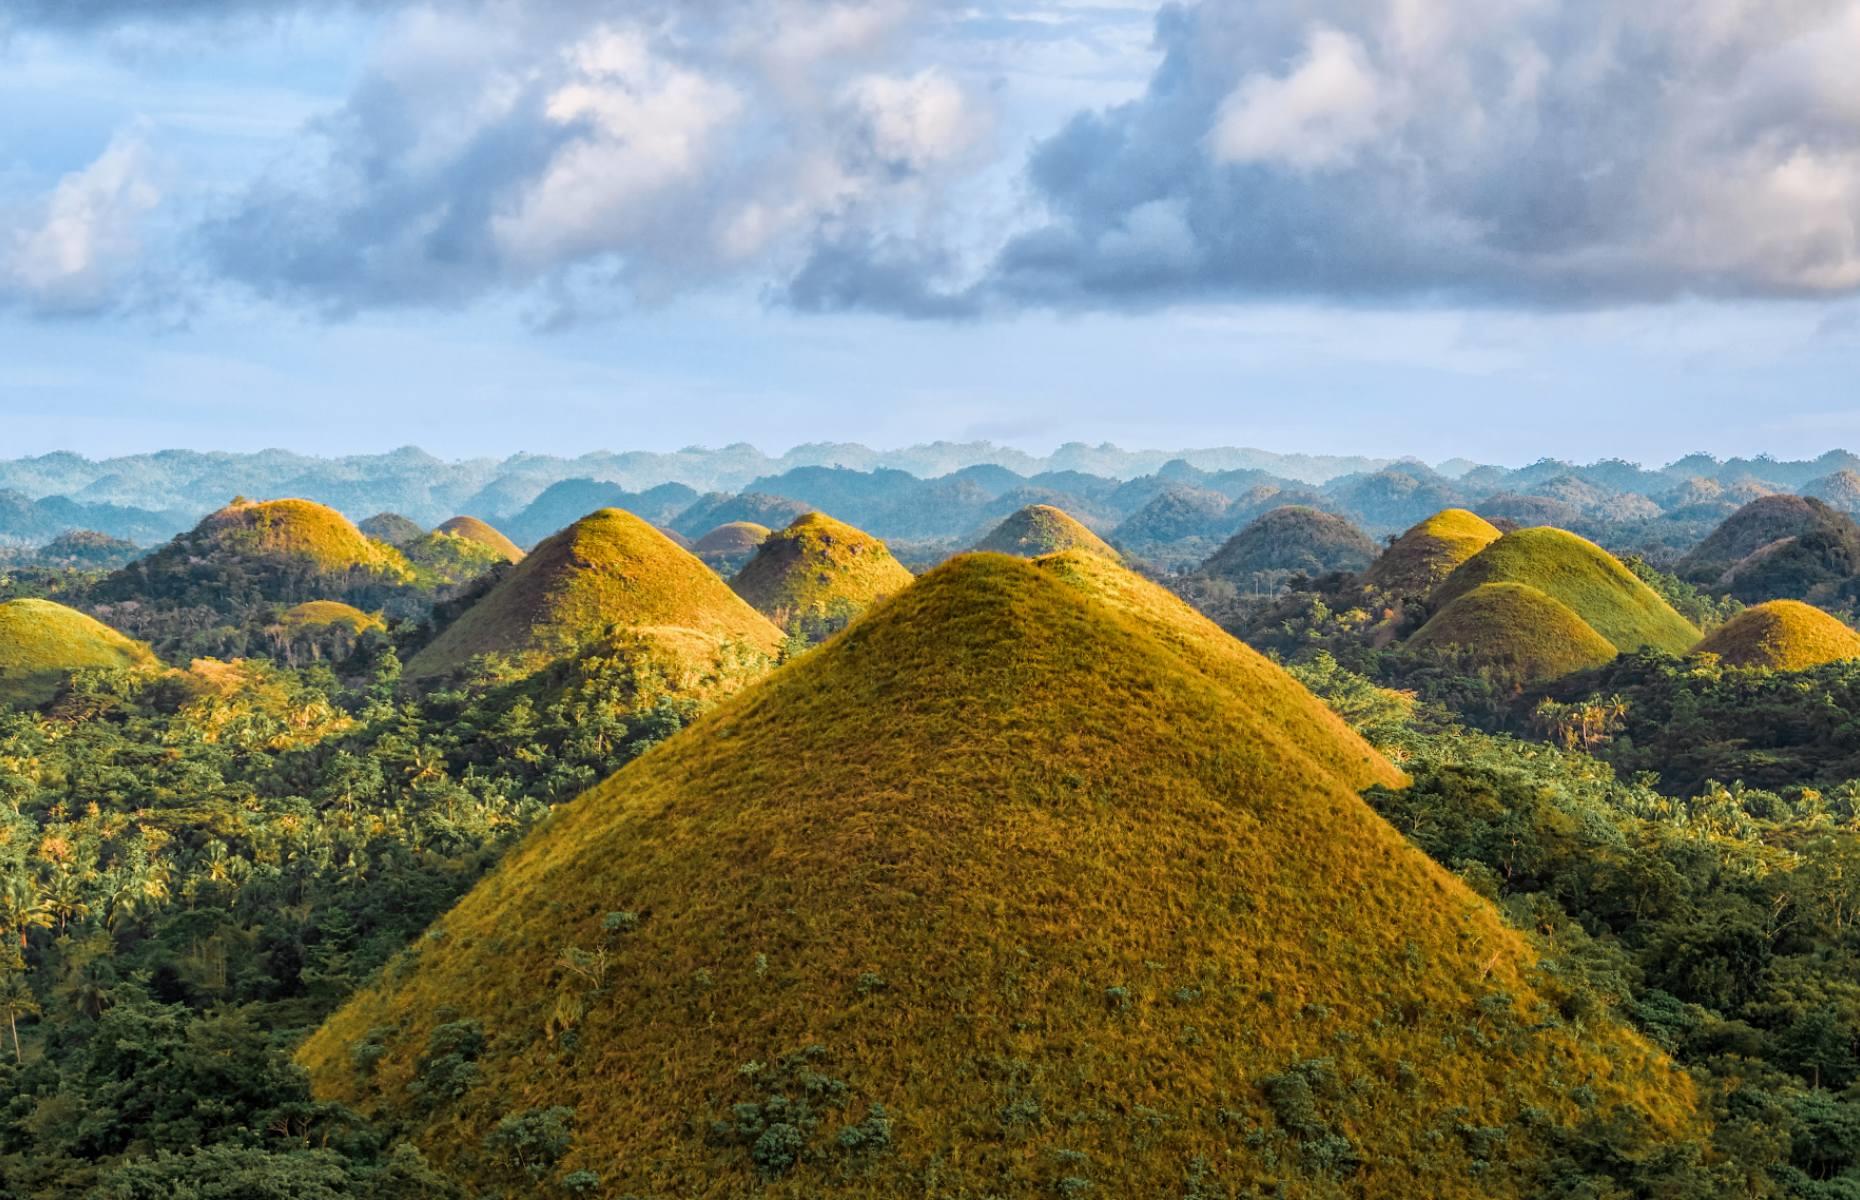 <p>So-named because they resemble little mounds of chocolate in the dry season – when their grassy coverings go from verdant green to brown – these otherworldly hills have puzzled scientists for decades. The peaks, which spread across 19 square miles (50sq km) on the island of Bohol in the Philippines, vary in size but have strikingly similar and symmetrical shapes as if created in molds.</p>